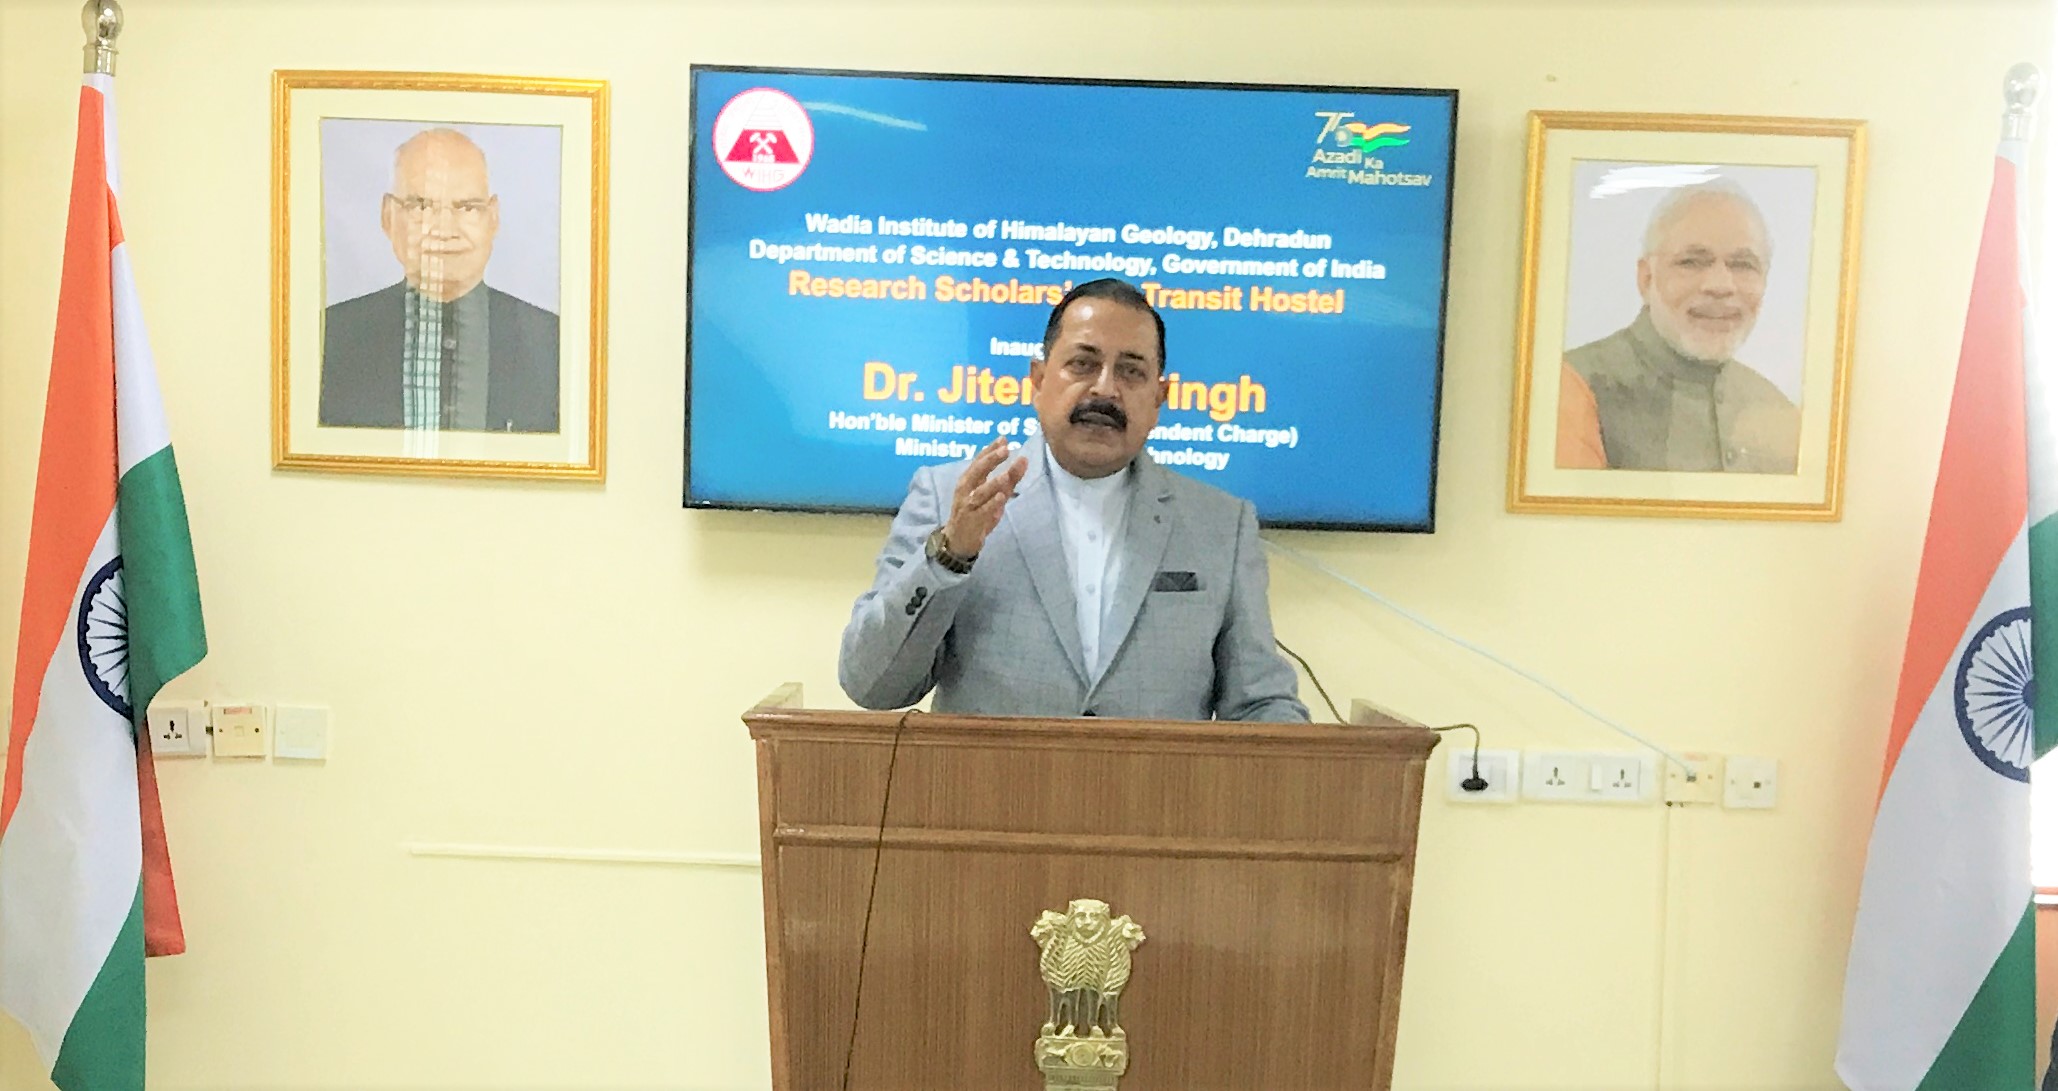 You are currently viewing Huge Himalayan geo-resources are yet to be fully explored, which can in many ways contribute to the socio-economic development of the Himalayan region as well as the country as a whole, says Union Minister Dr.Jitendra Singh